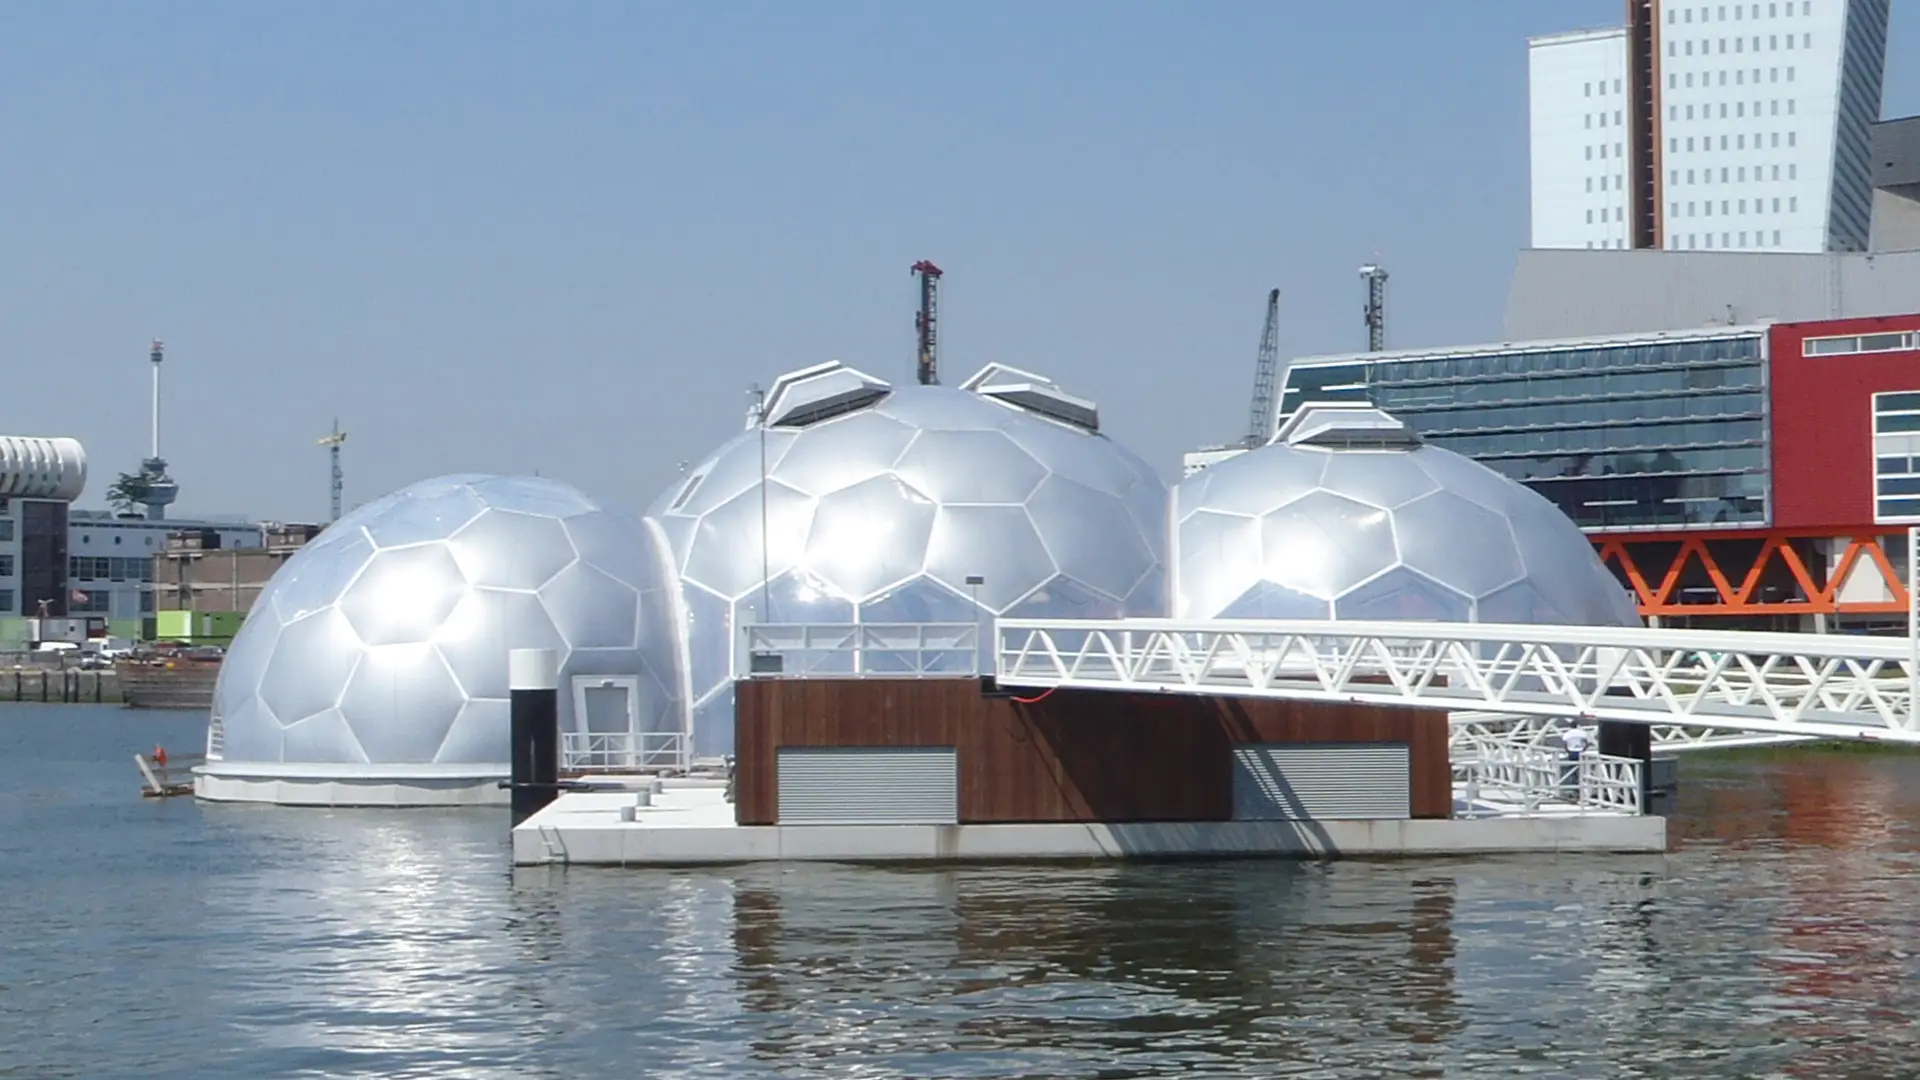 Designed by Deltasync and Public Domain Architects, the domes of the floating pavilion in Rotterdam are clad in Texlon® ETFE by Vector Foiltec